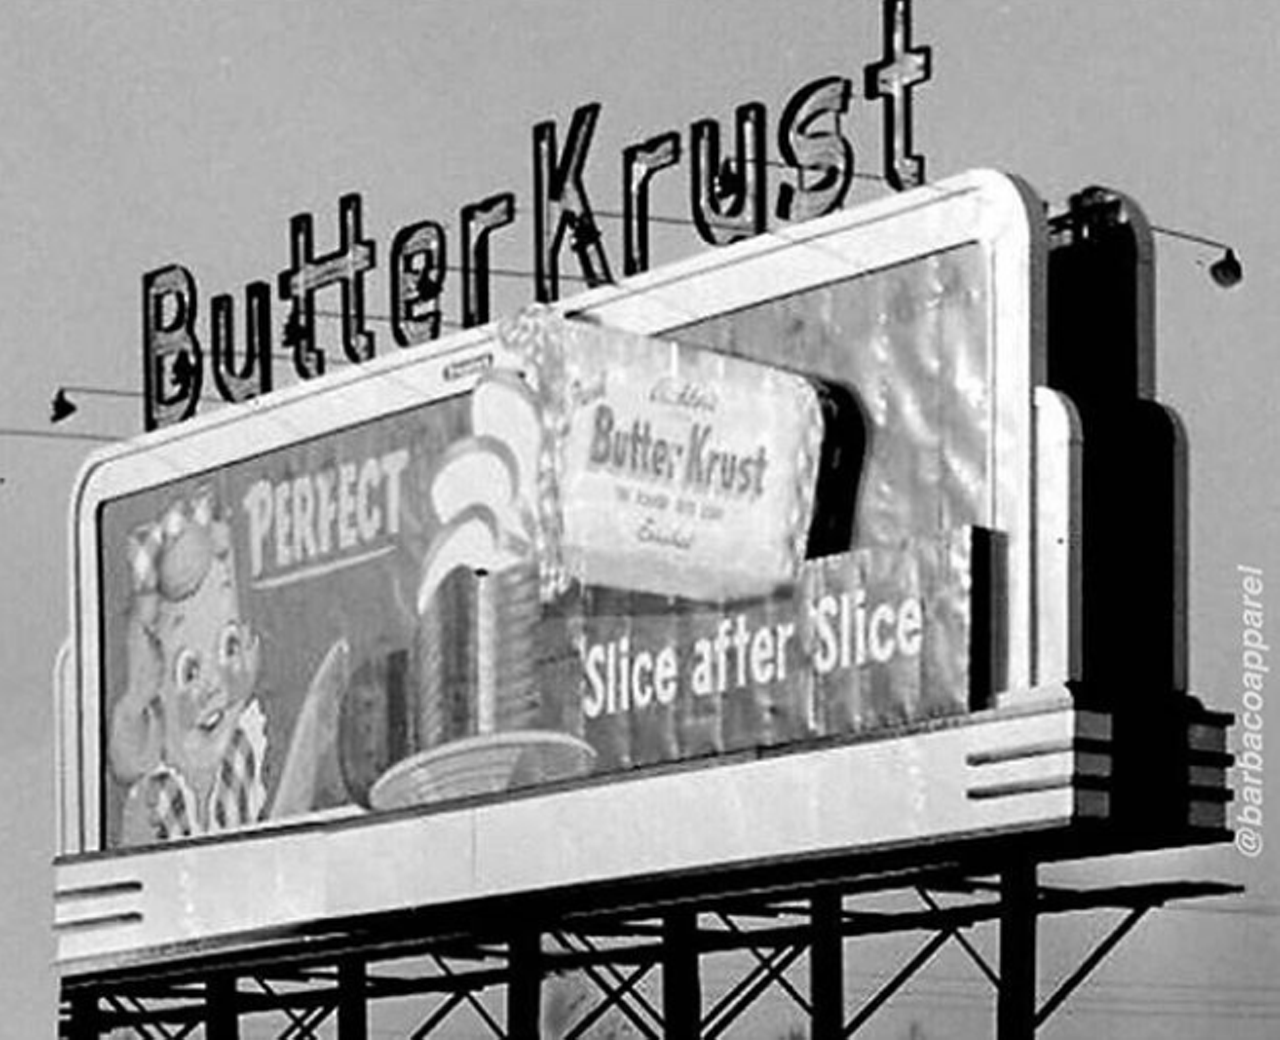 Bread rolling on conveyor belt on Butter Krust billboard
San Pedro used to be a lot more tempting to drive down, as it was home of the iconic moving billboard from Butter Krust at the Hildebrand intersection. The “Falling Slices” billboard was exactly what it sounds like. Slice after slice would tumble down endlessly from the infinite loaf.
Photo via Instagram / barbacoapparel